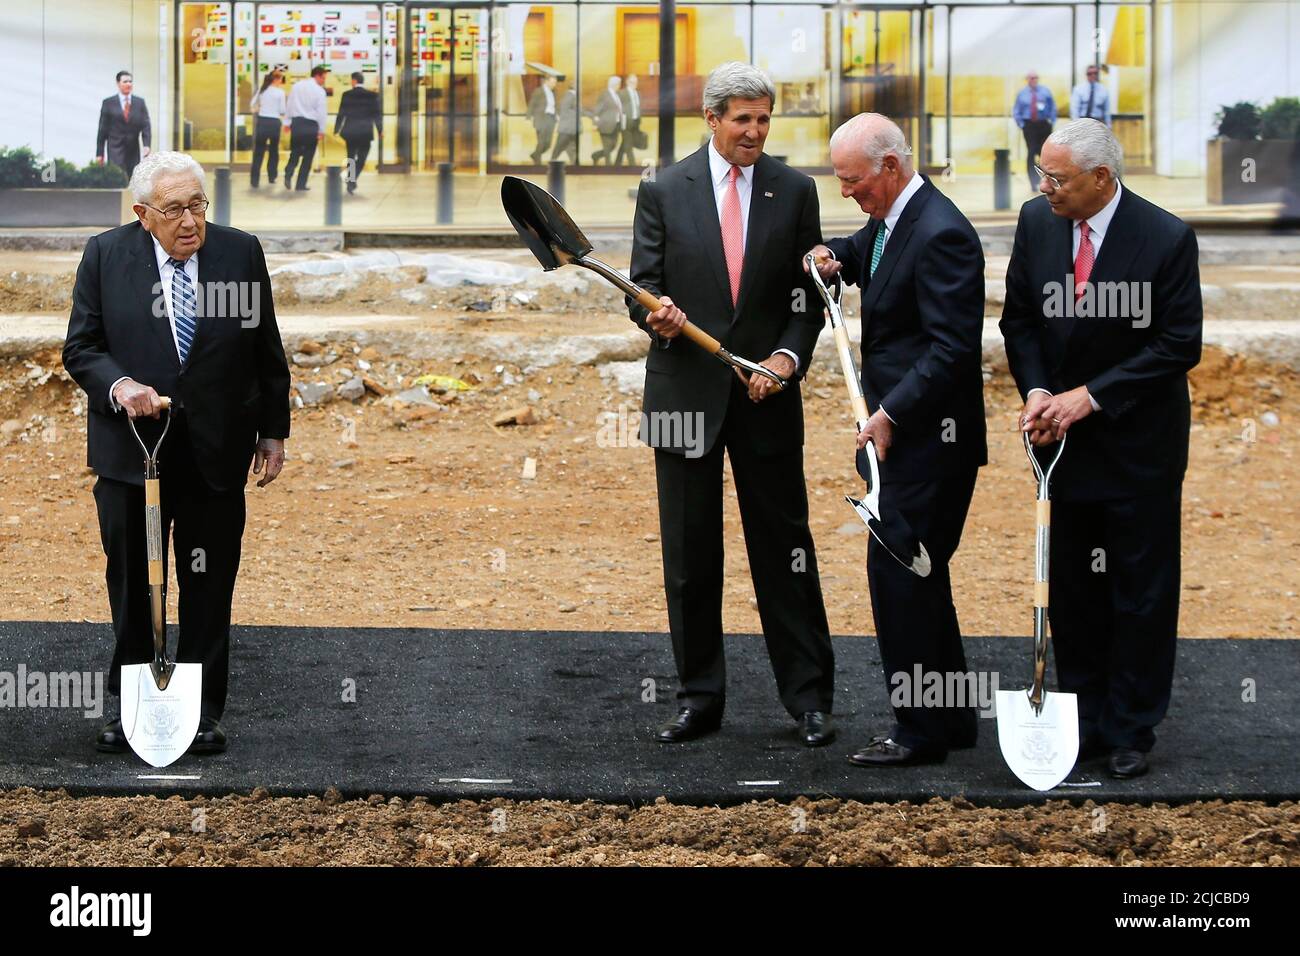 U.S. Secretary of State John Kerry (3rd R) jokes with former Secretaries of  State Henry Kissinger (L), James Baker (2nd R) and Colin Powell (R) at a  cermonial groundbreaking for the U.S.